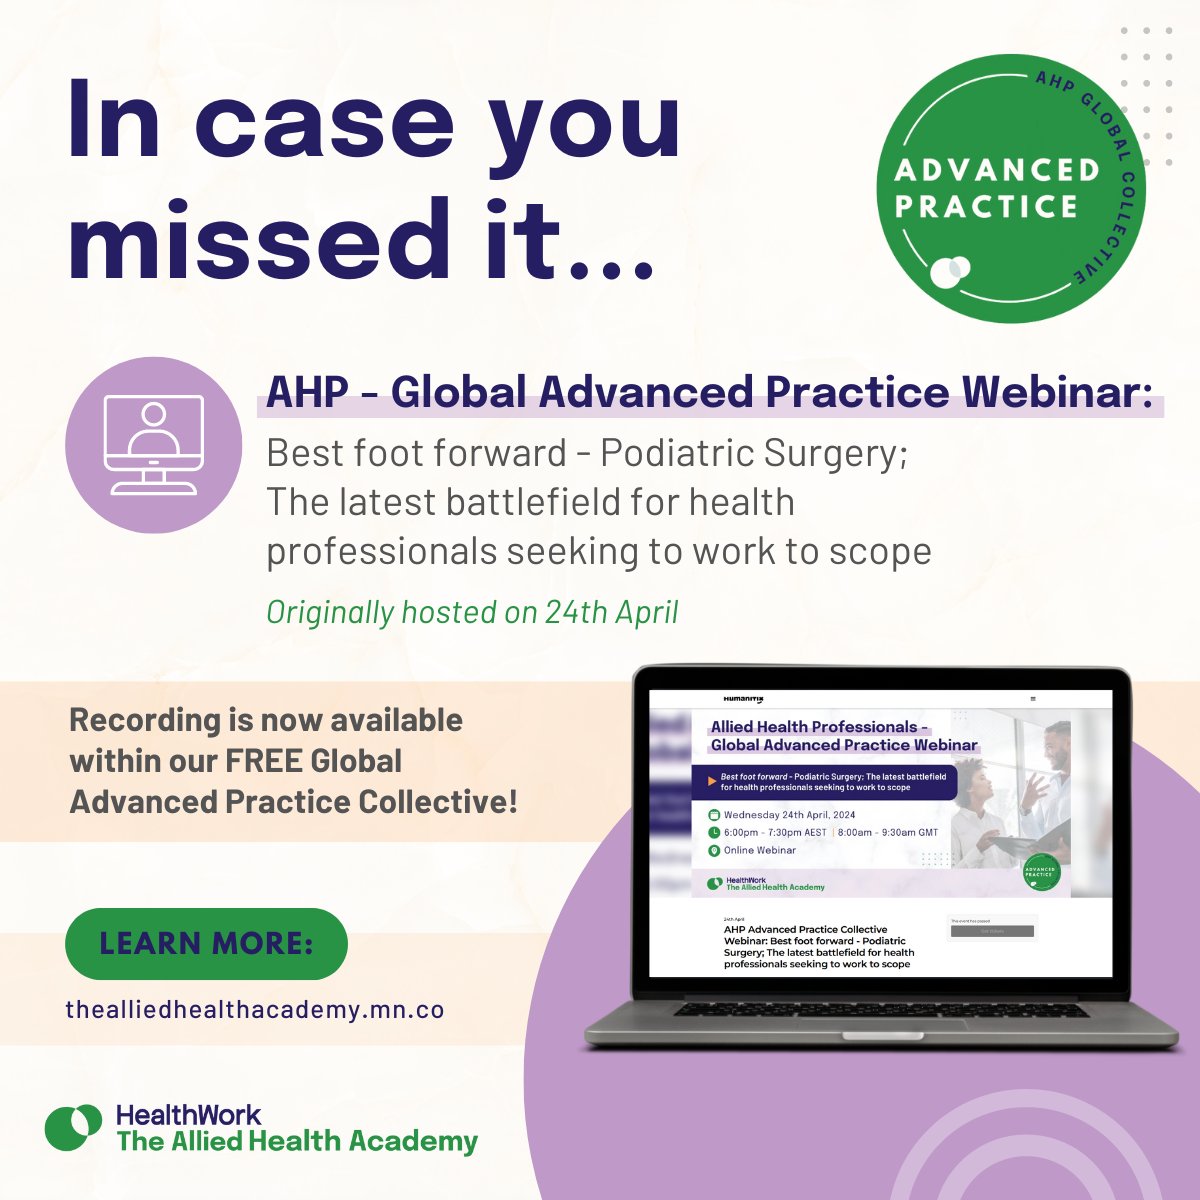 Did you miss The Allied Health Academy's recent AHP Advanced Practice Collective Webinar? The recording is now available. 📢 For CURRENT members of The Academy: loom.ly/nGw4C7M 📢 If you haven't joined The Academy yet: loom.ly/z8QN_ns #AlliedHealth #AHP